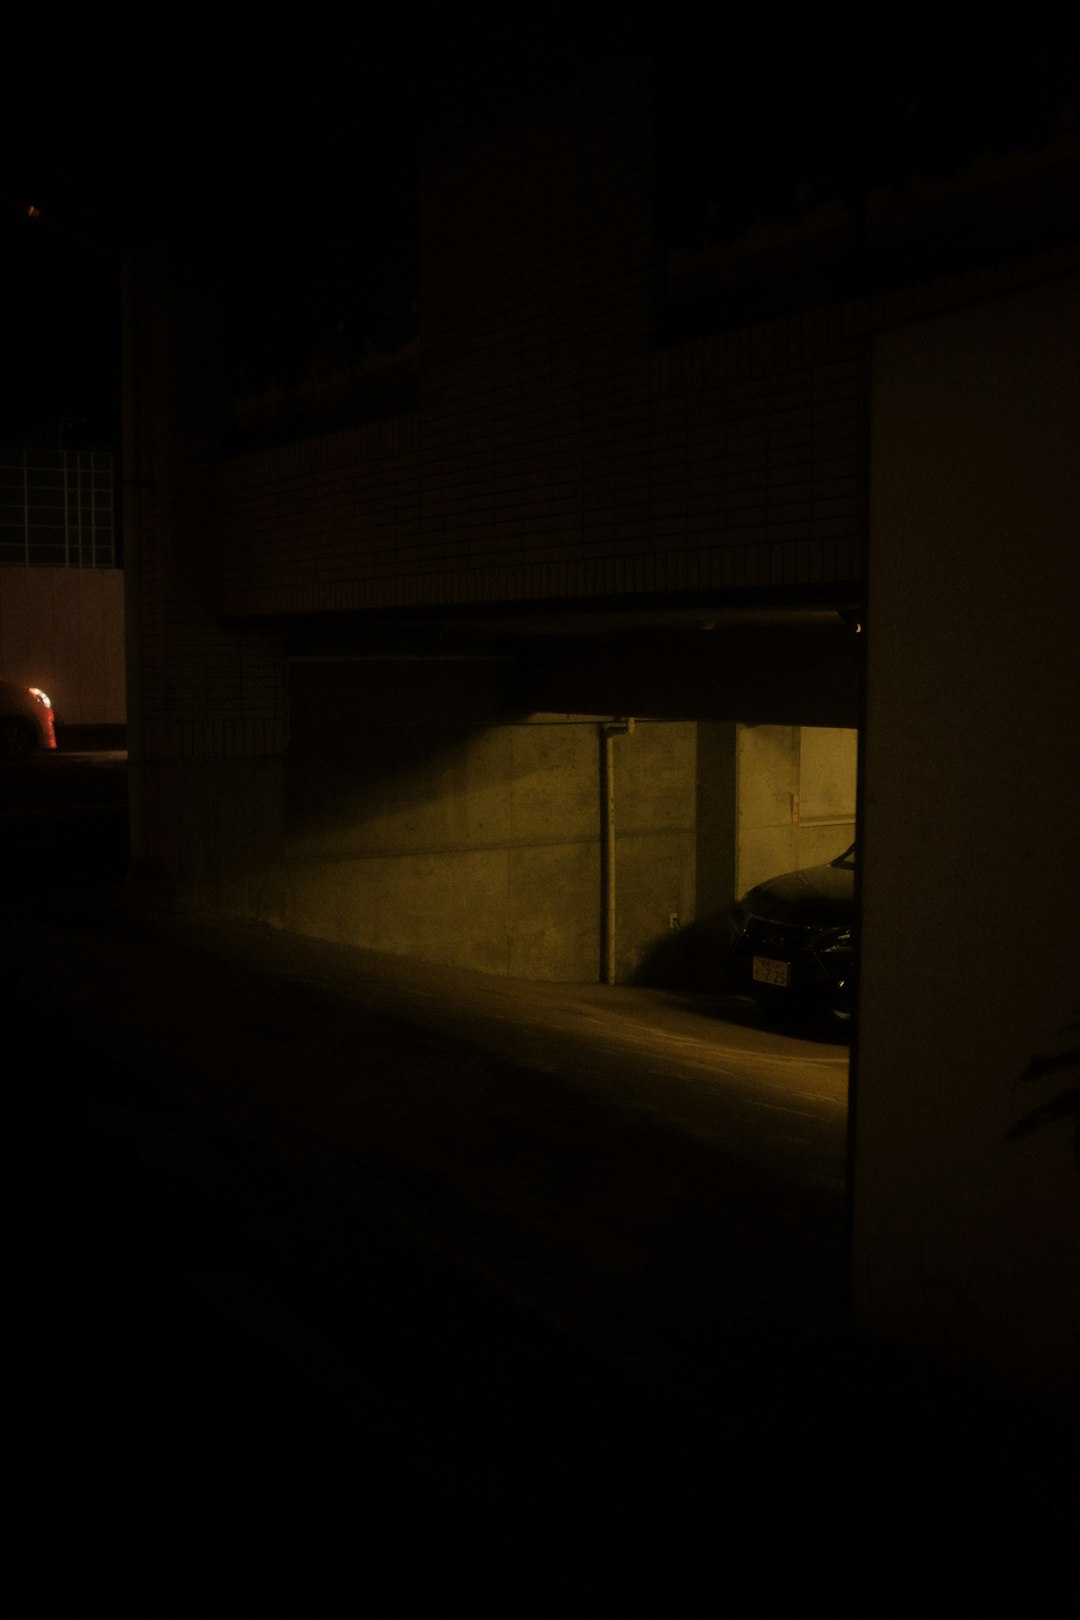 black car parked beside white concrete building during night time